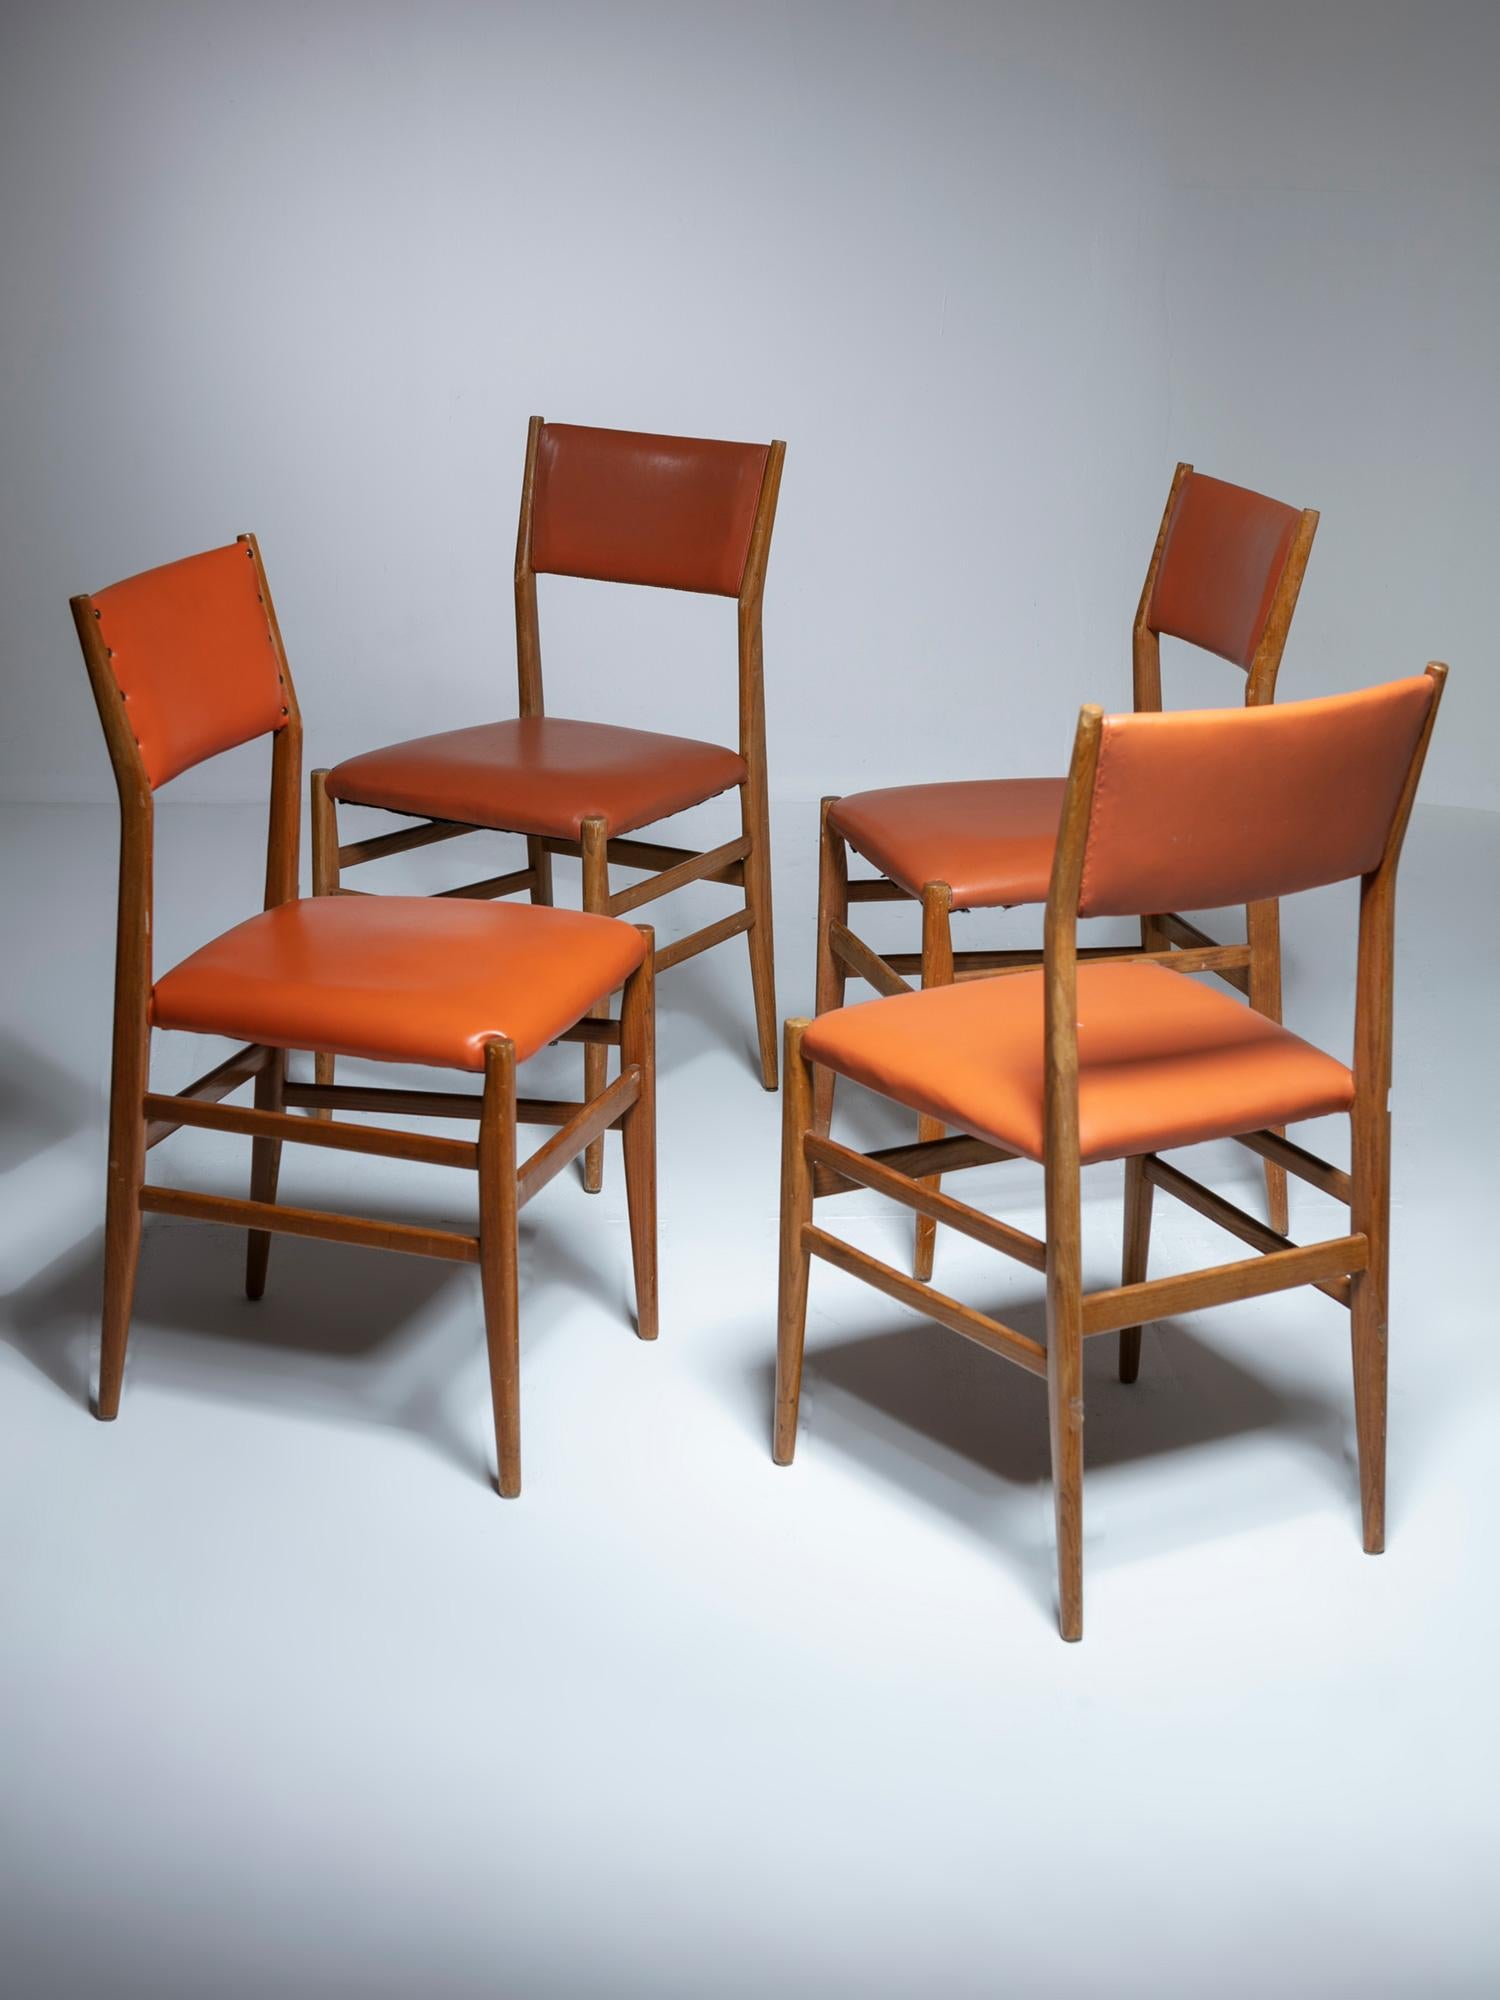 Four chairs model 646 by Gio Ponti for Cassina.
Rare version with upholstered backrest.
Set features three chairs come with same color and the fourth one in a different color.